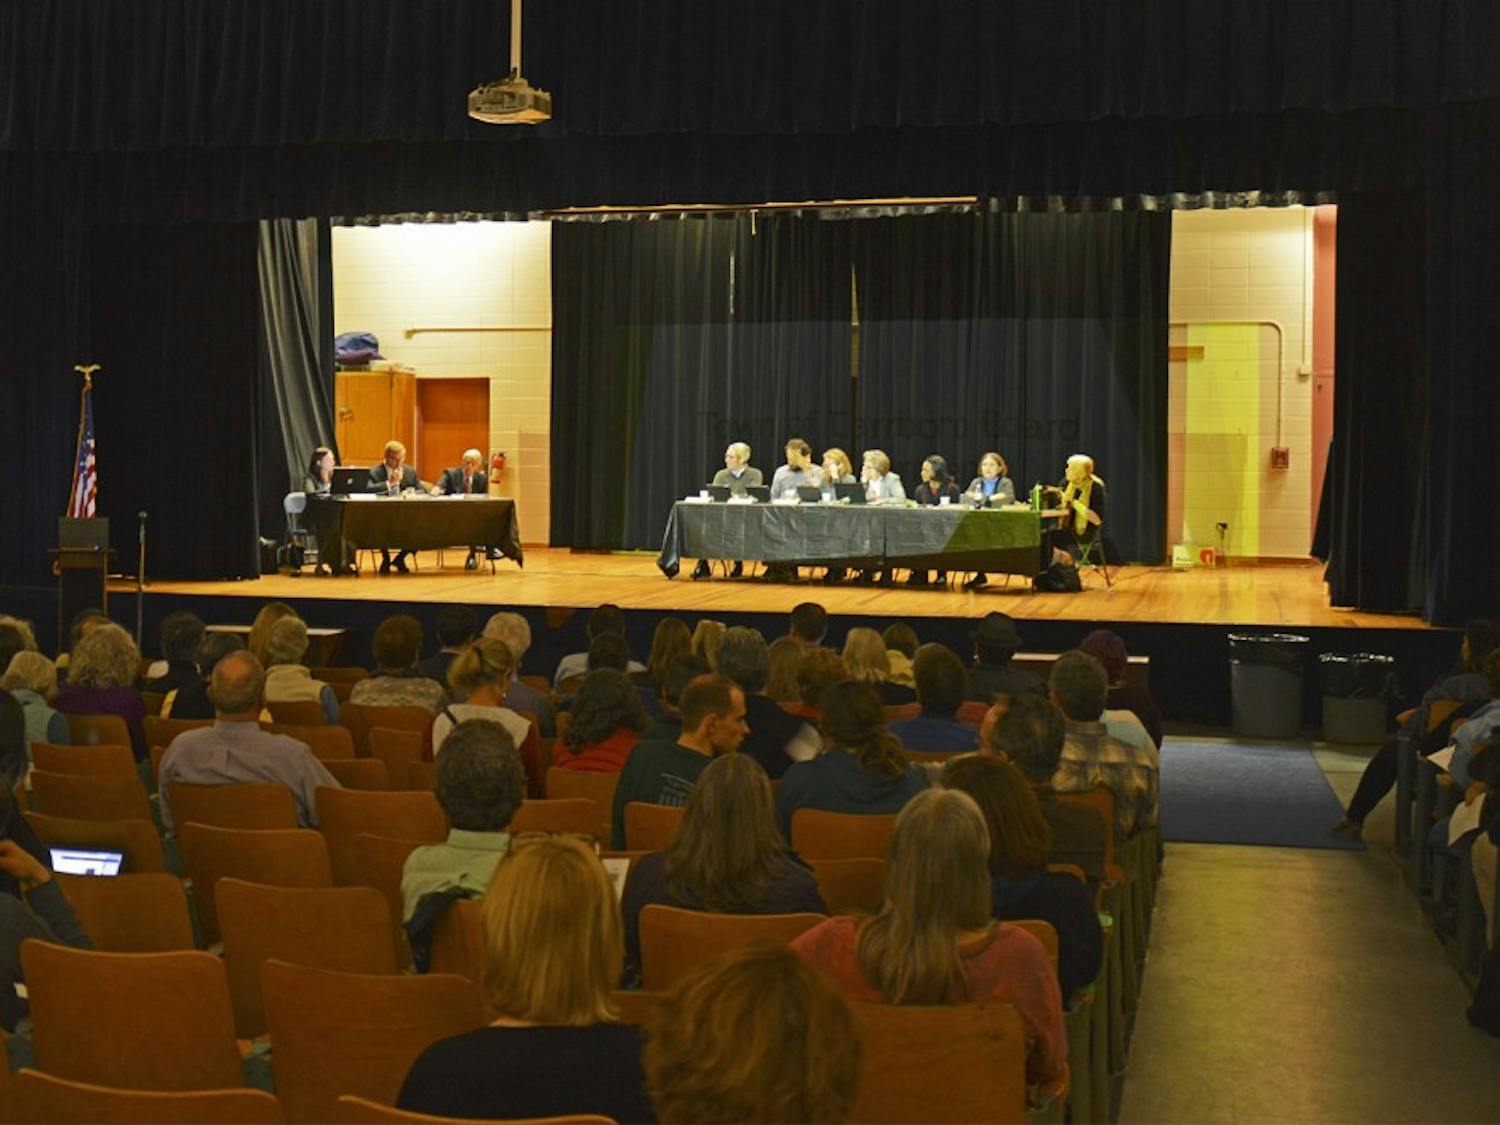 On March.22, 2016 Carrboro Board of Aldermen Public Hearing of the IFC's FoodFirst Meeting is held at the Carrboro Elementary School Auditorium.  